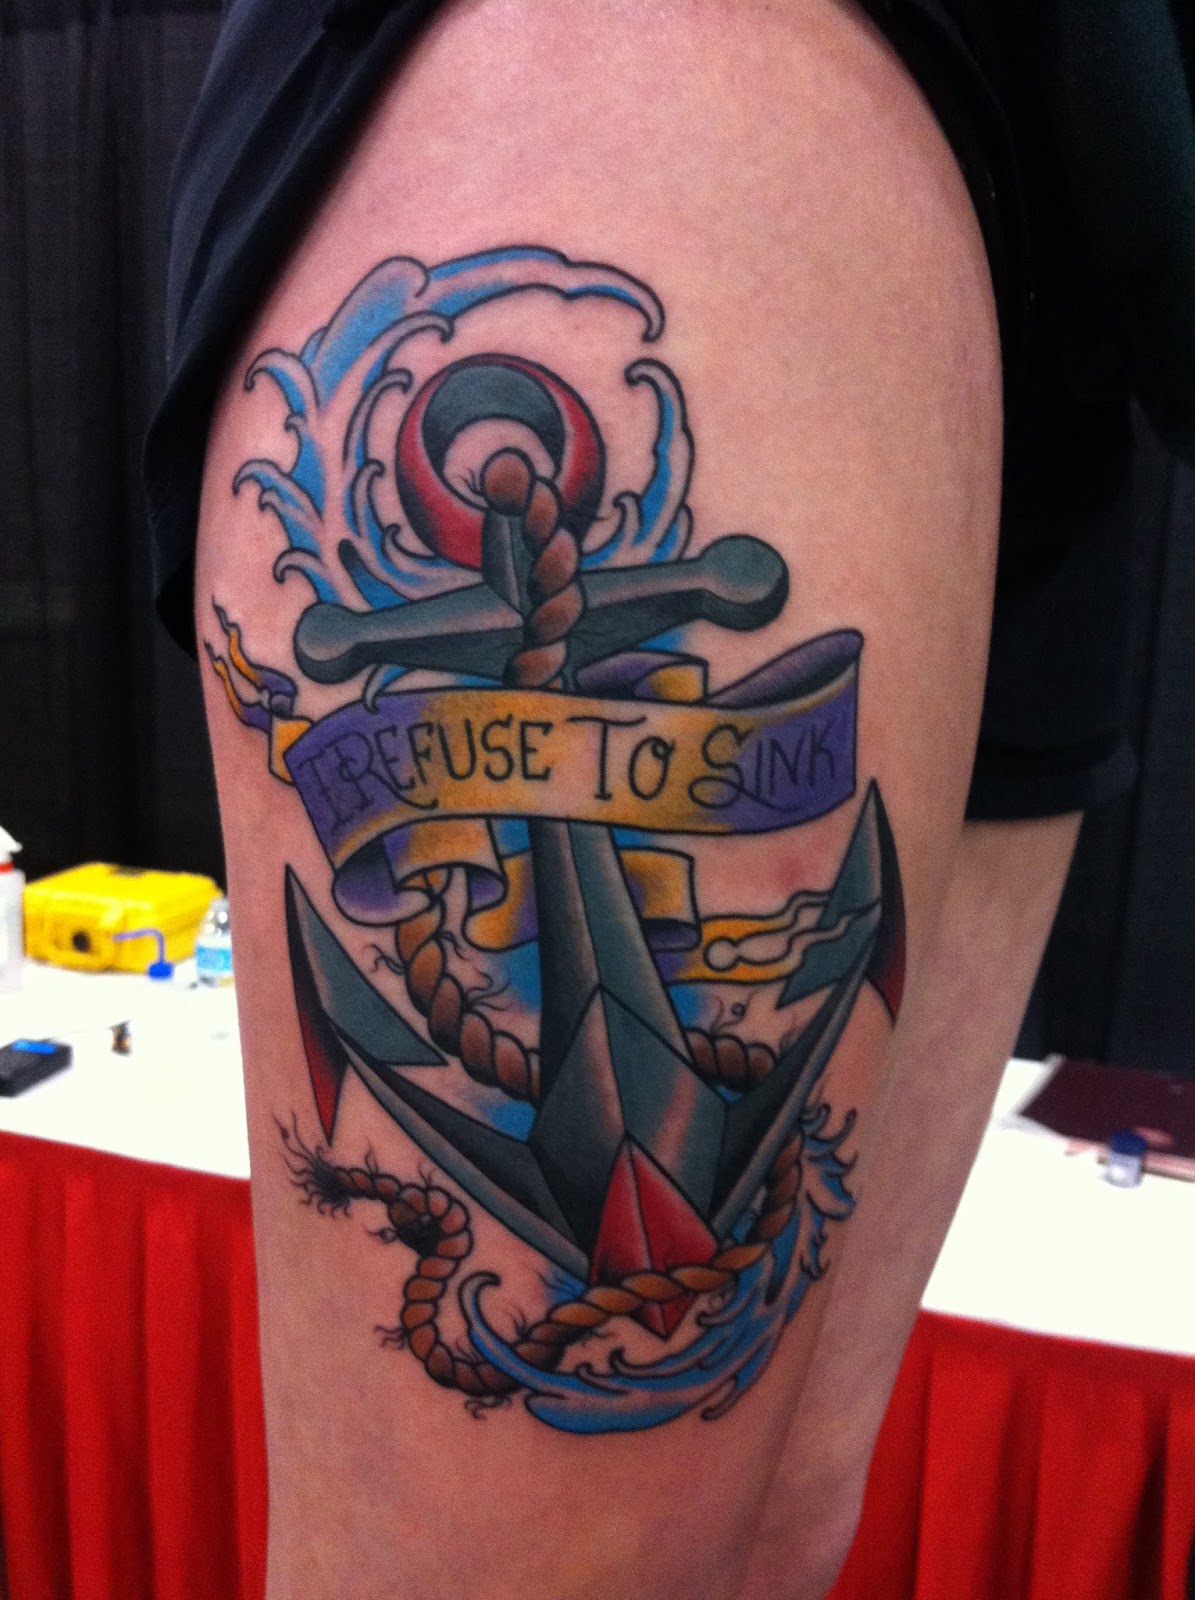 Anchors do not refuse to sink try this instead  rfunny